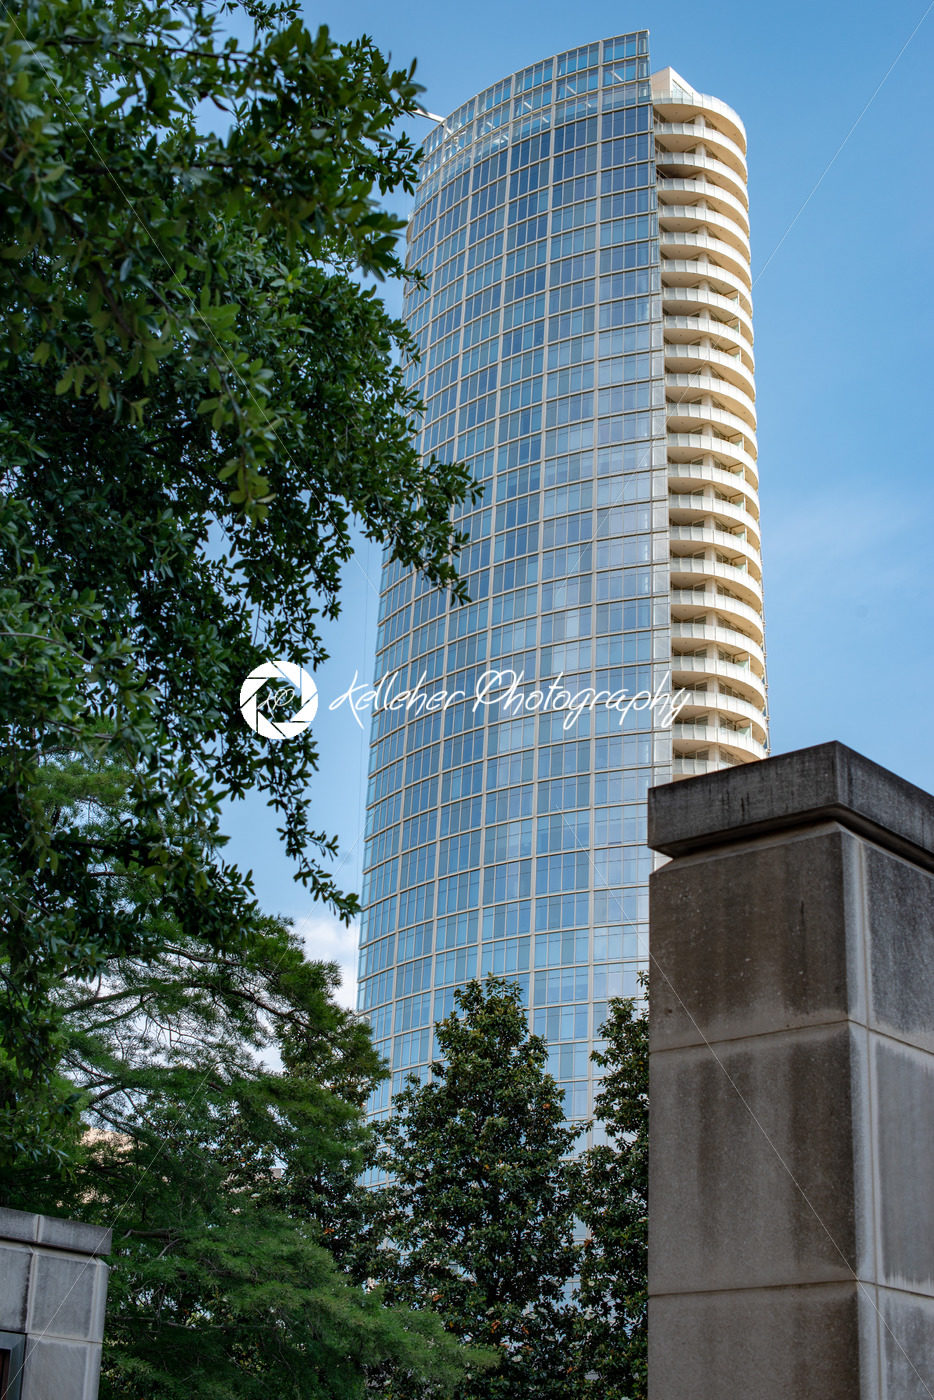 Dallas, Texas – May 7, 2018: The Museum Tower in Dallas, Texas against blue sky - Kelleher Photography Store